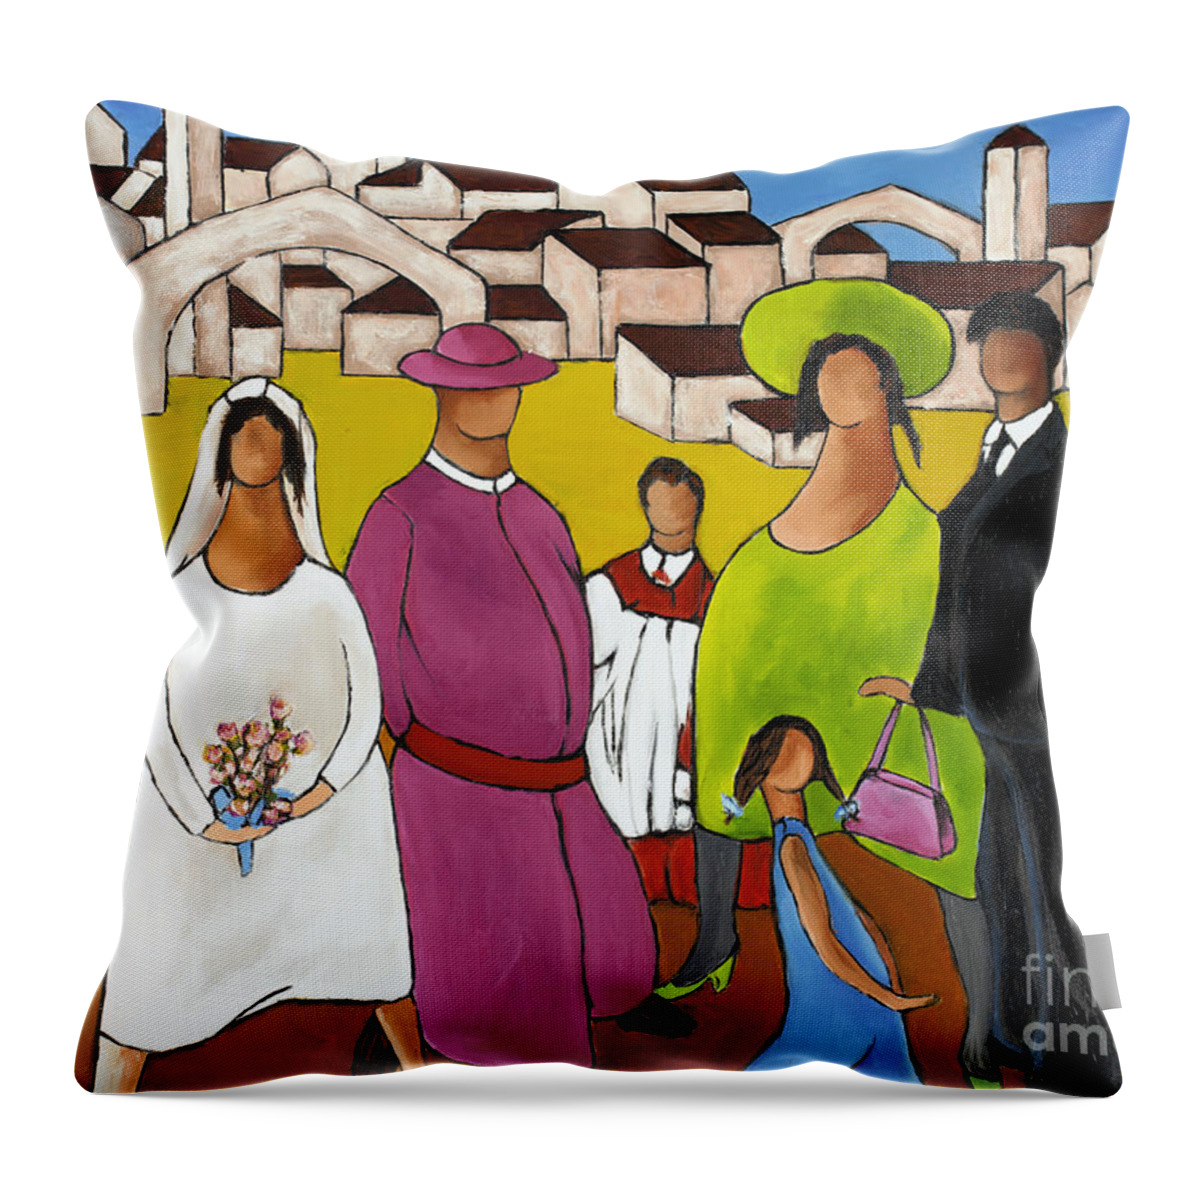 Wedding In Plaza Throw Pillow featuring the painting Waiting For The Groom by William Cain